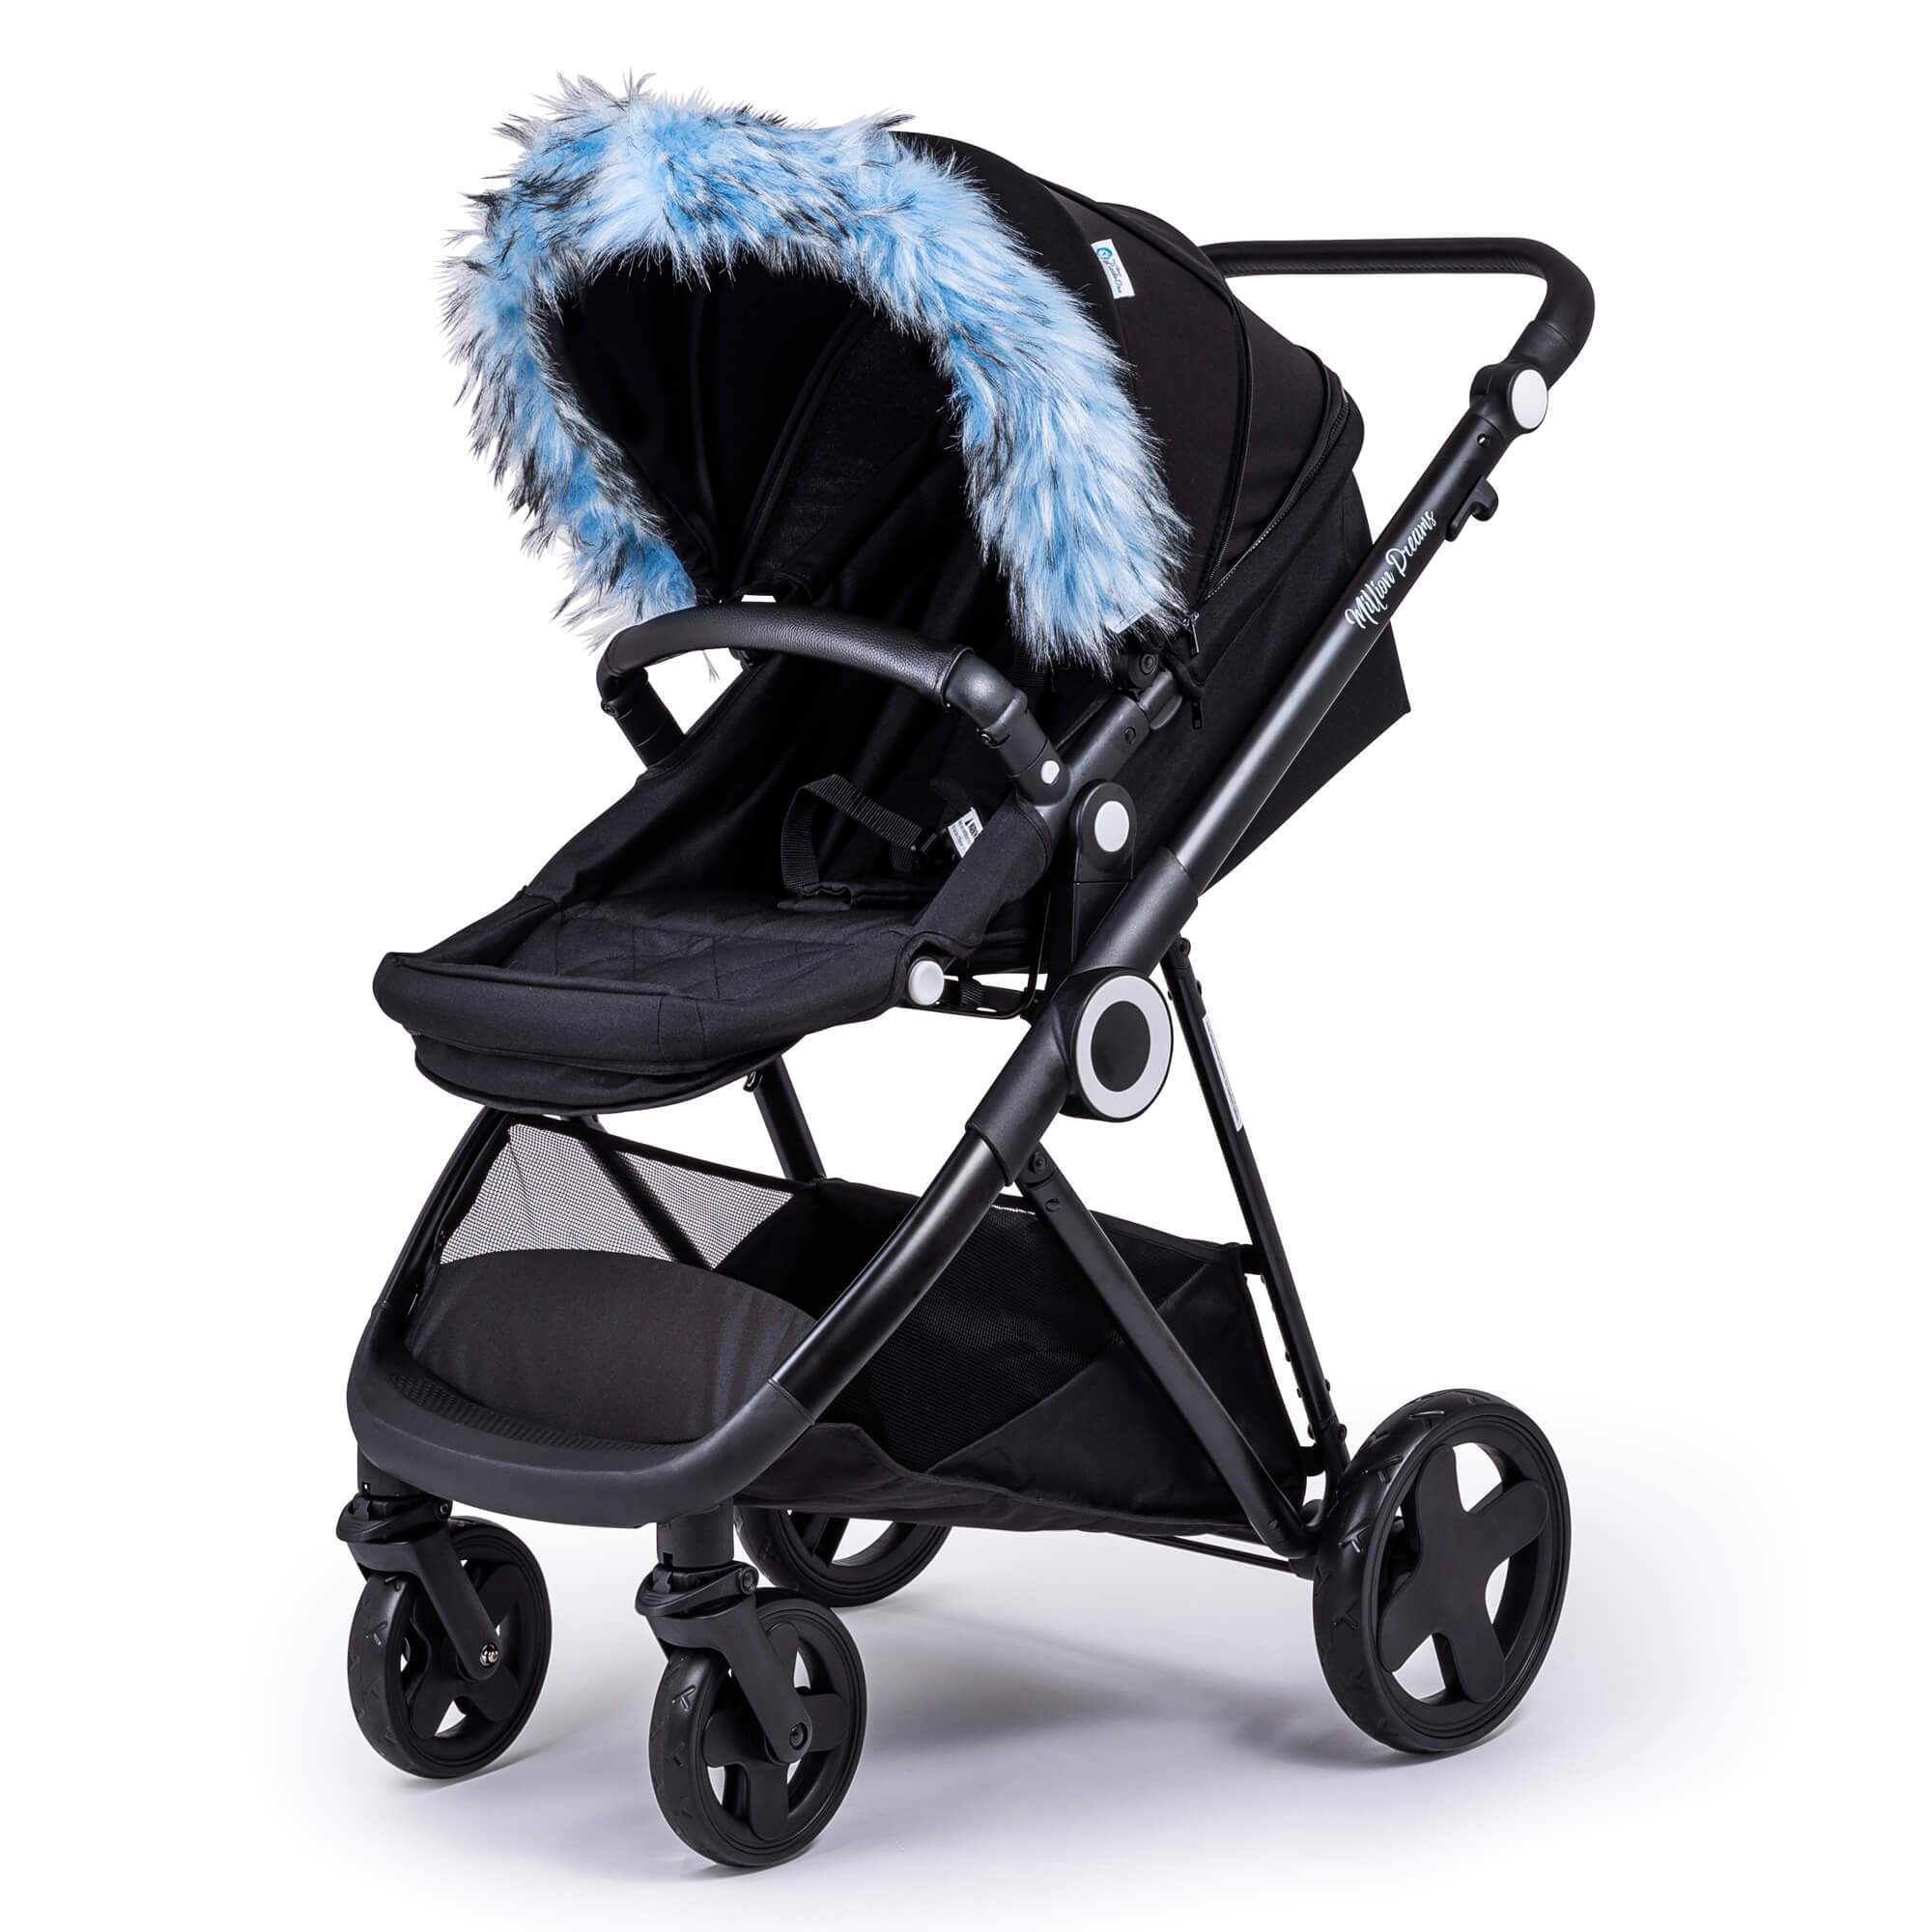 Pram Fur Hood Trim Attachment for Pushchair Compatible with DoBuggy - Light Blue / Fits All Models | For Your Little One